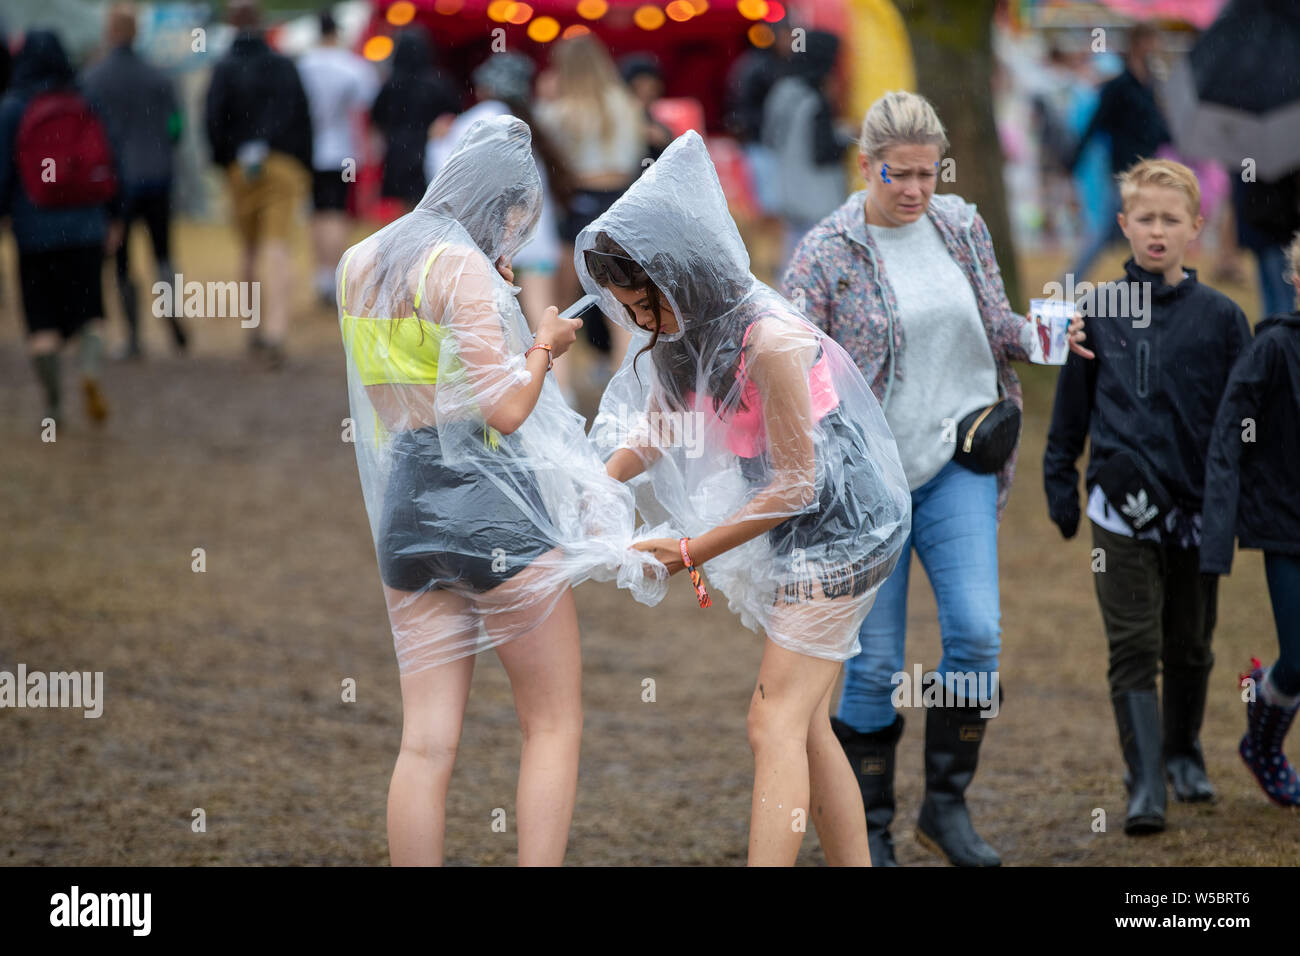 Standon, UK. Saturday 27 July 2019.  A couple of friends adjusting there ponchos at Standon Calling set in the picturesque grounds of Standon Lordship © Jason Richardson / Alamy Live News Stock Photo